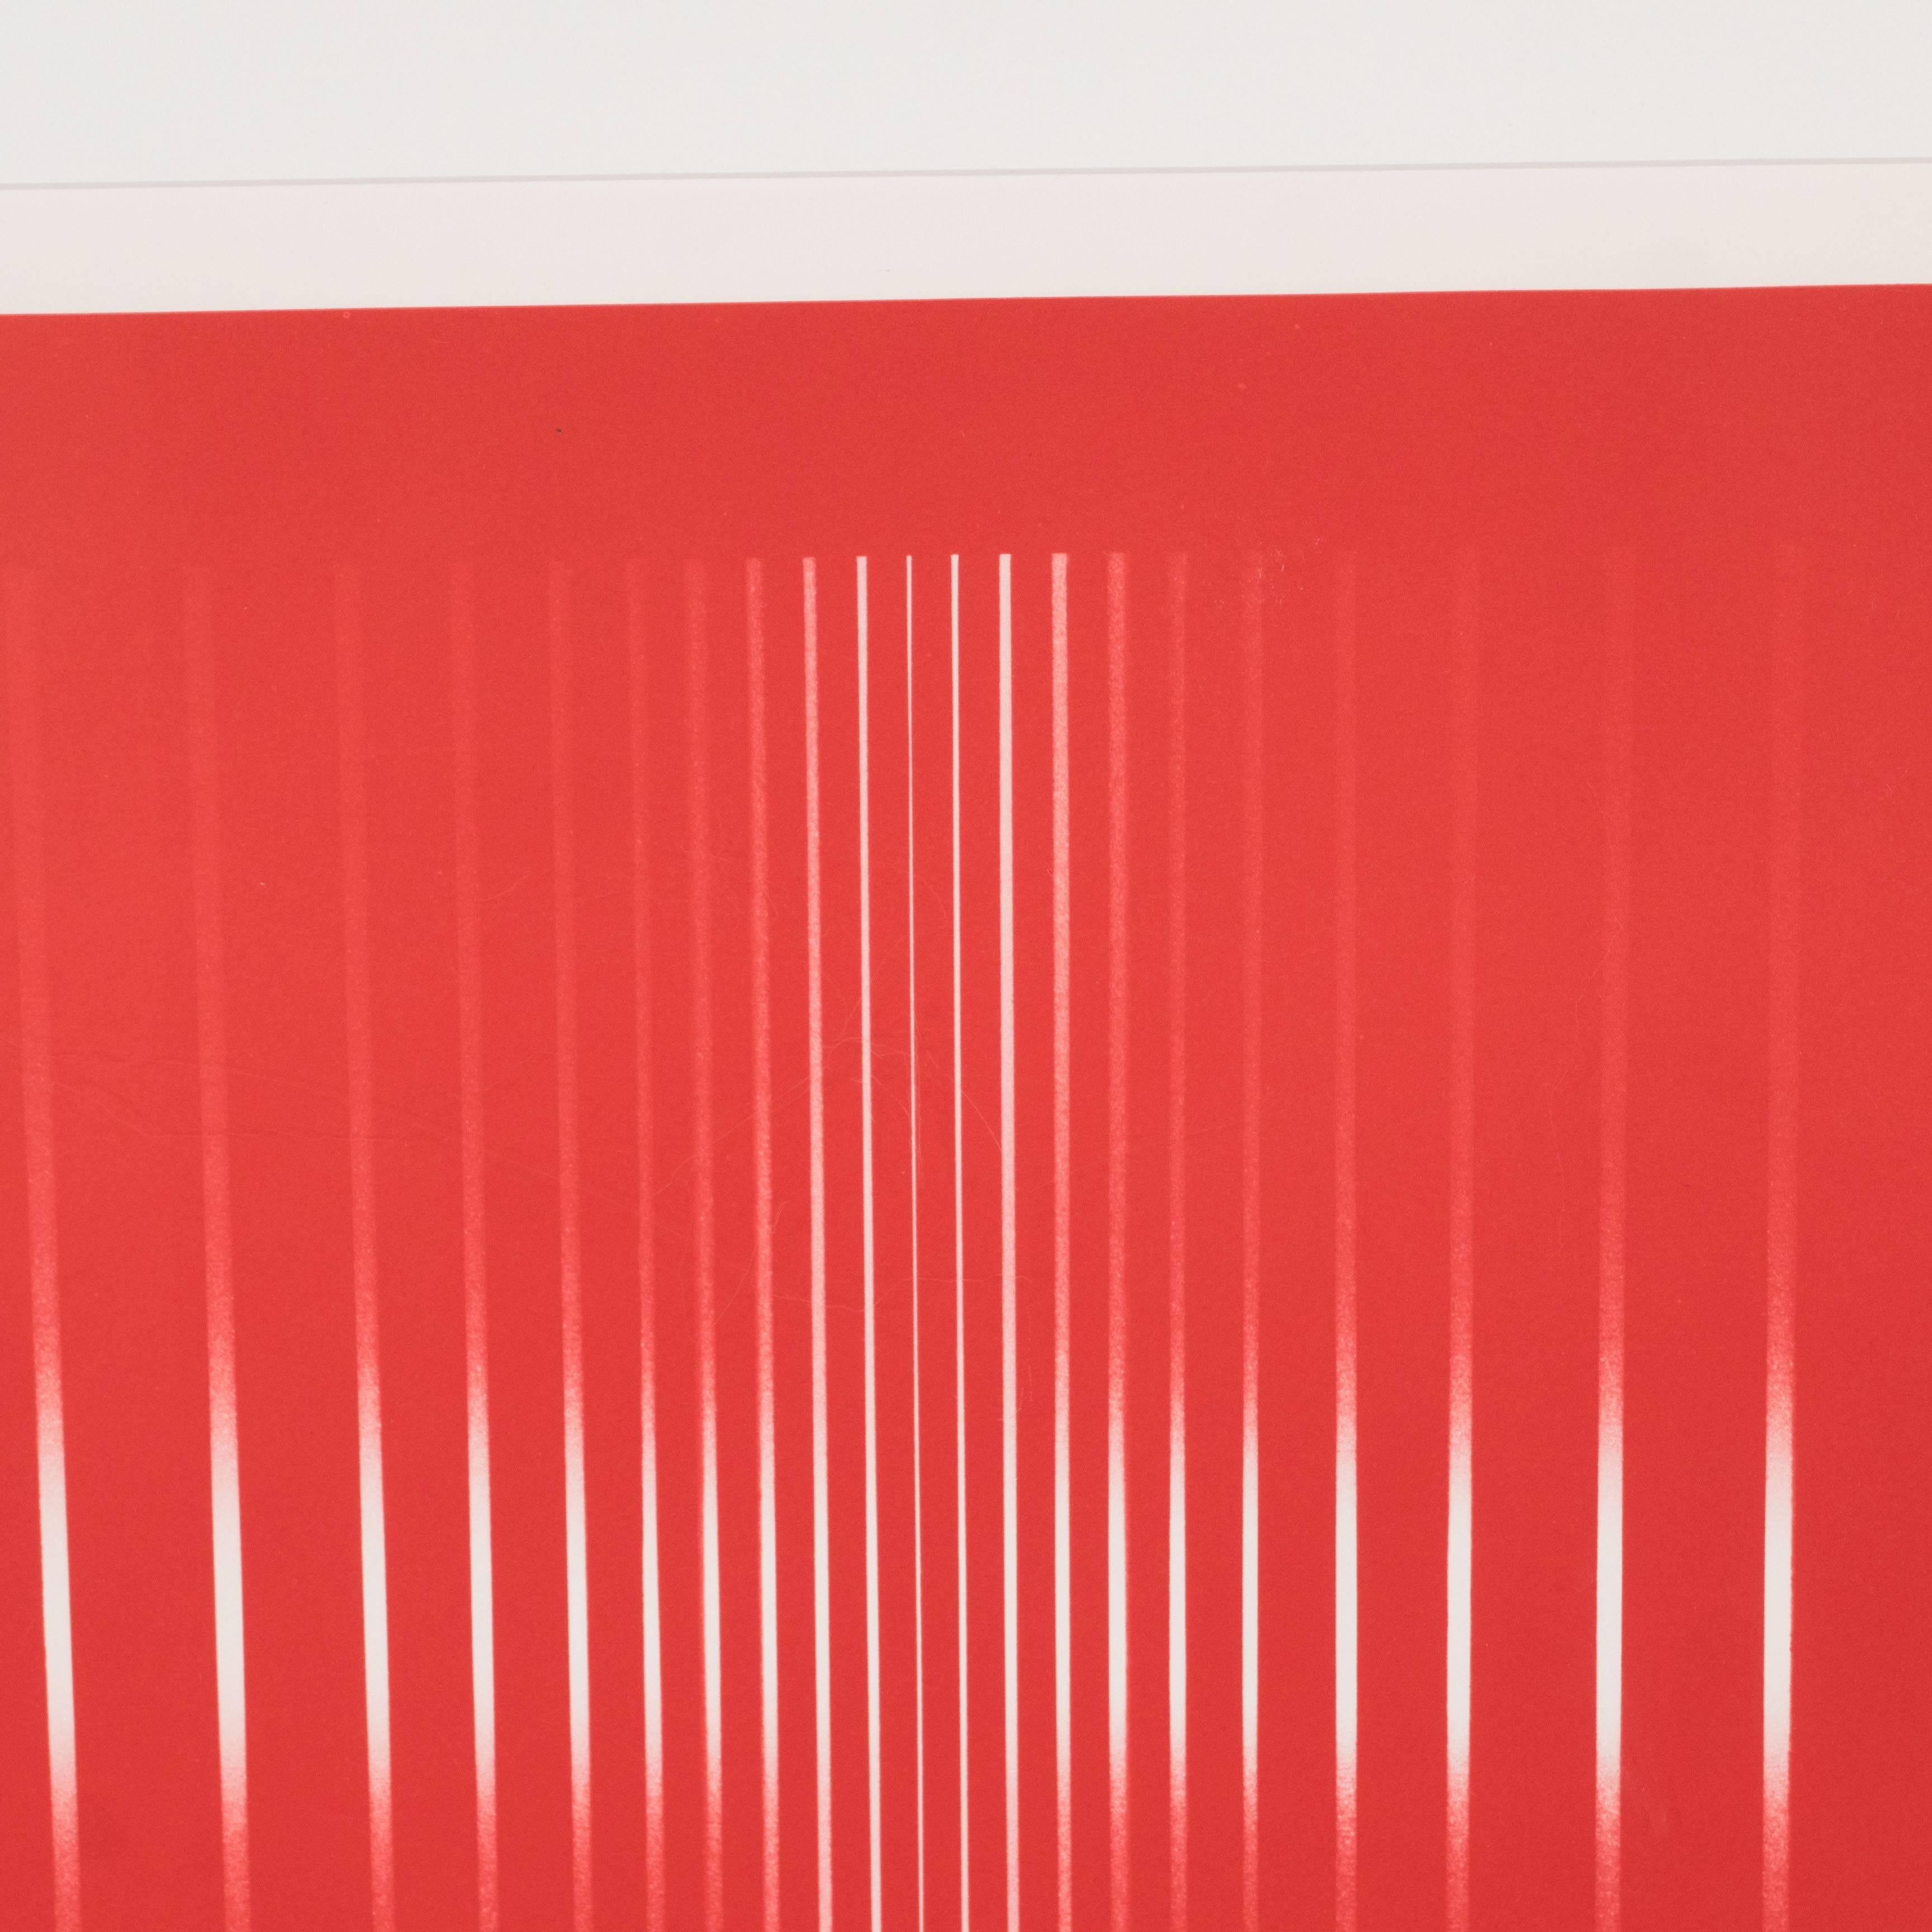 Dynamic Mid-Century Modern Op-Art Signed Serigraph by Ennio Finzi in Vibrant Red 3